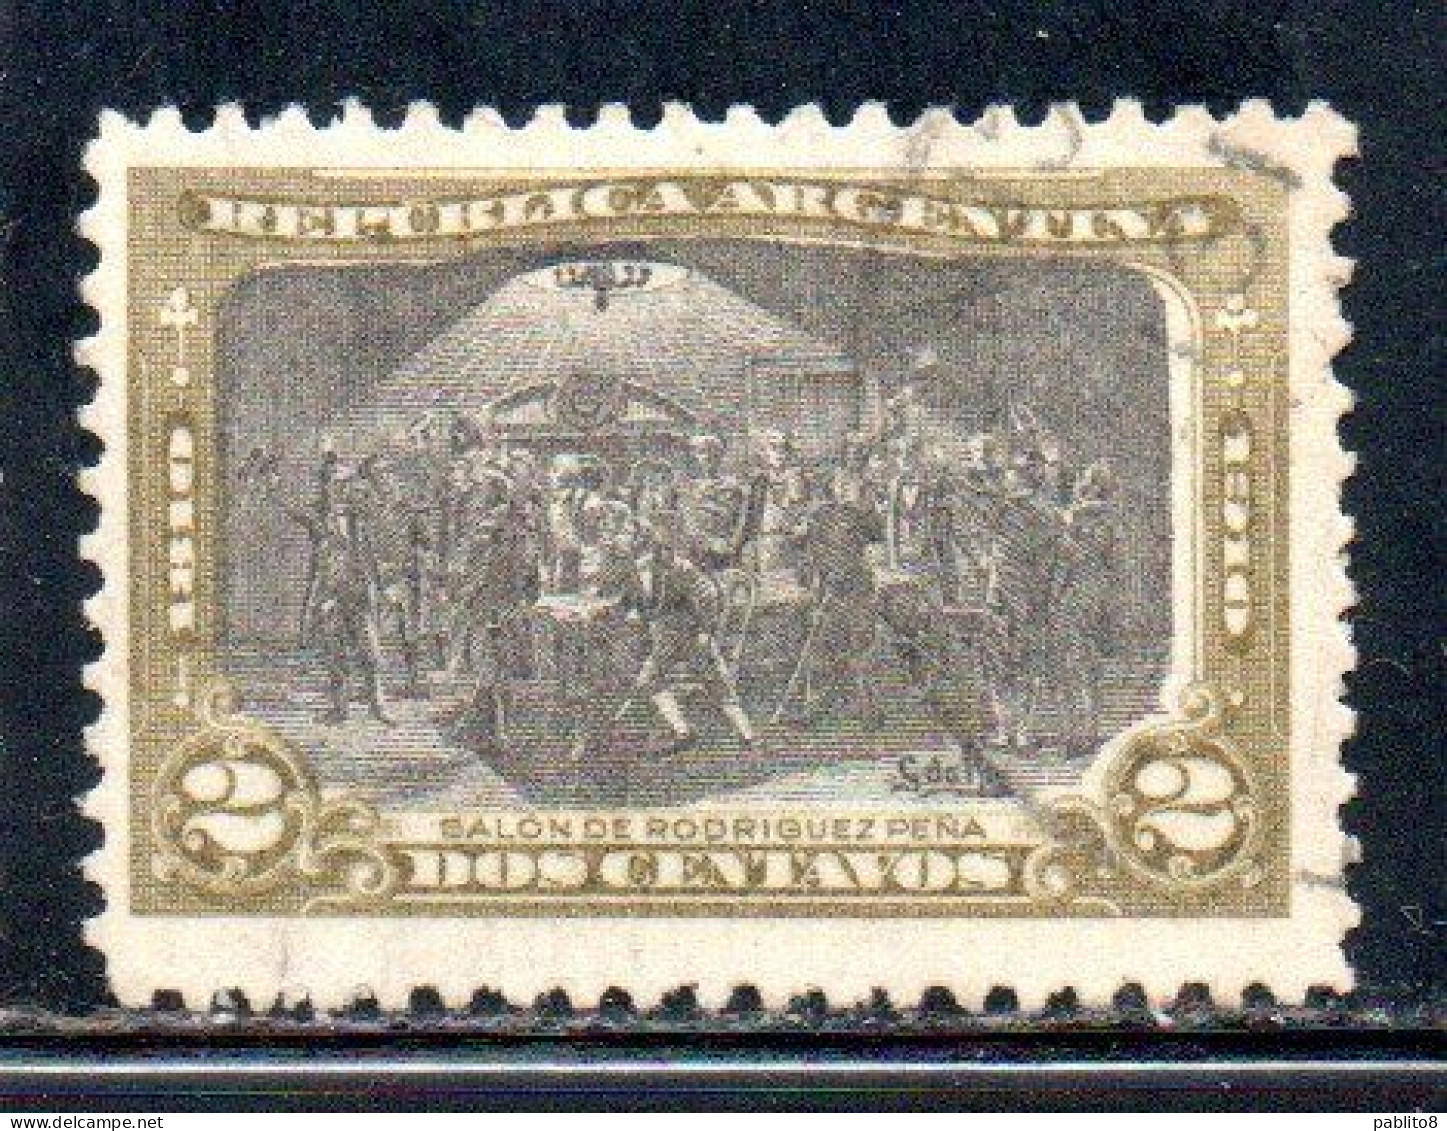 ARGENTINA 1910 MEETING AT PENA'S HOME 2c USED USADO OBLITERE' - Used Stamps